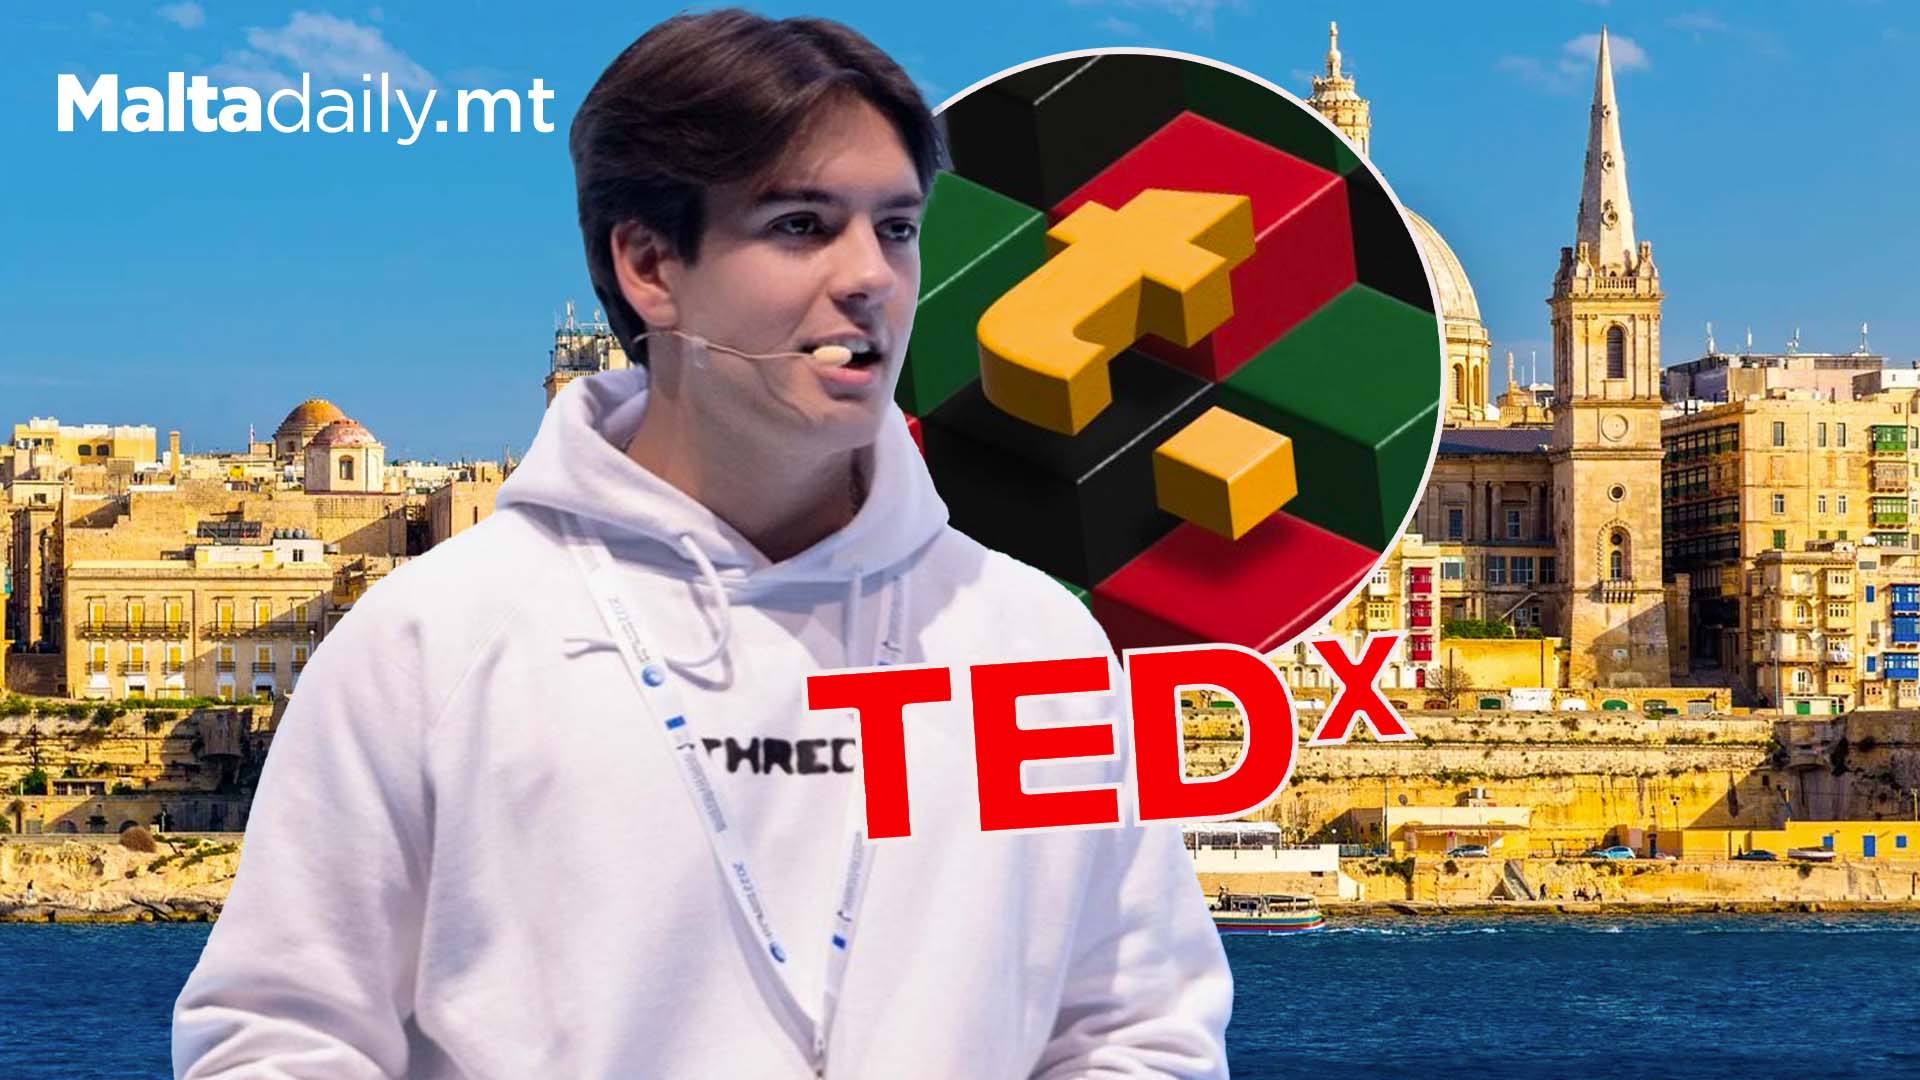 THRED Media Founder Jenk Oz Coming To Malta